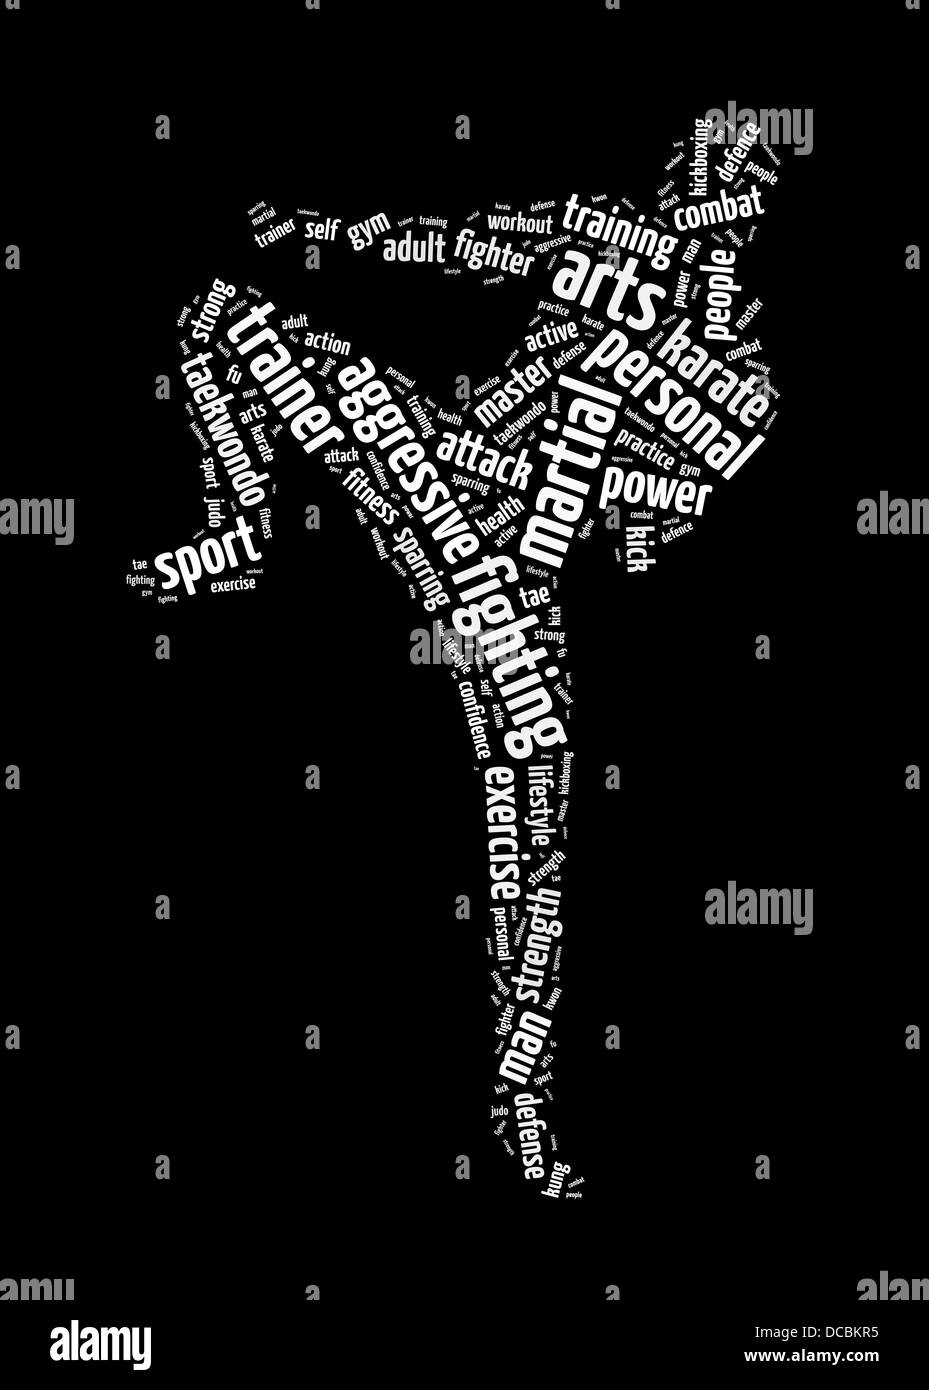 Words illustration of a man doing martial arts training in black background Stock Photo